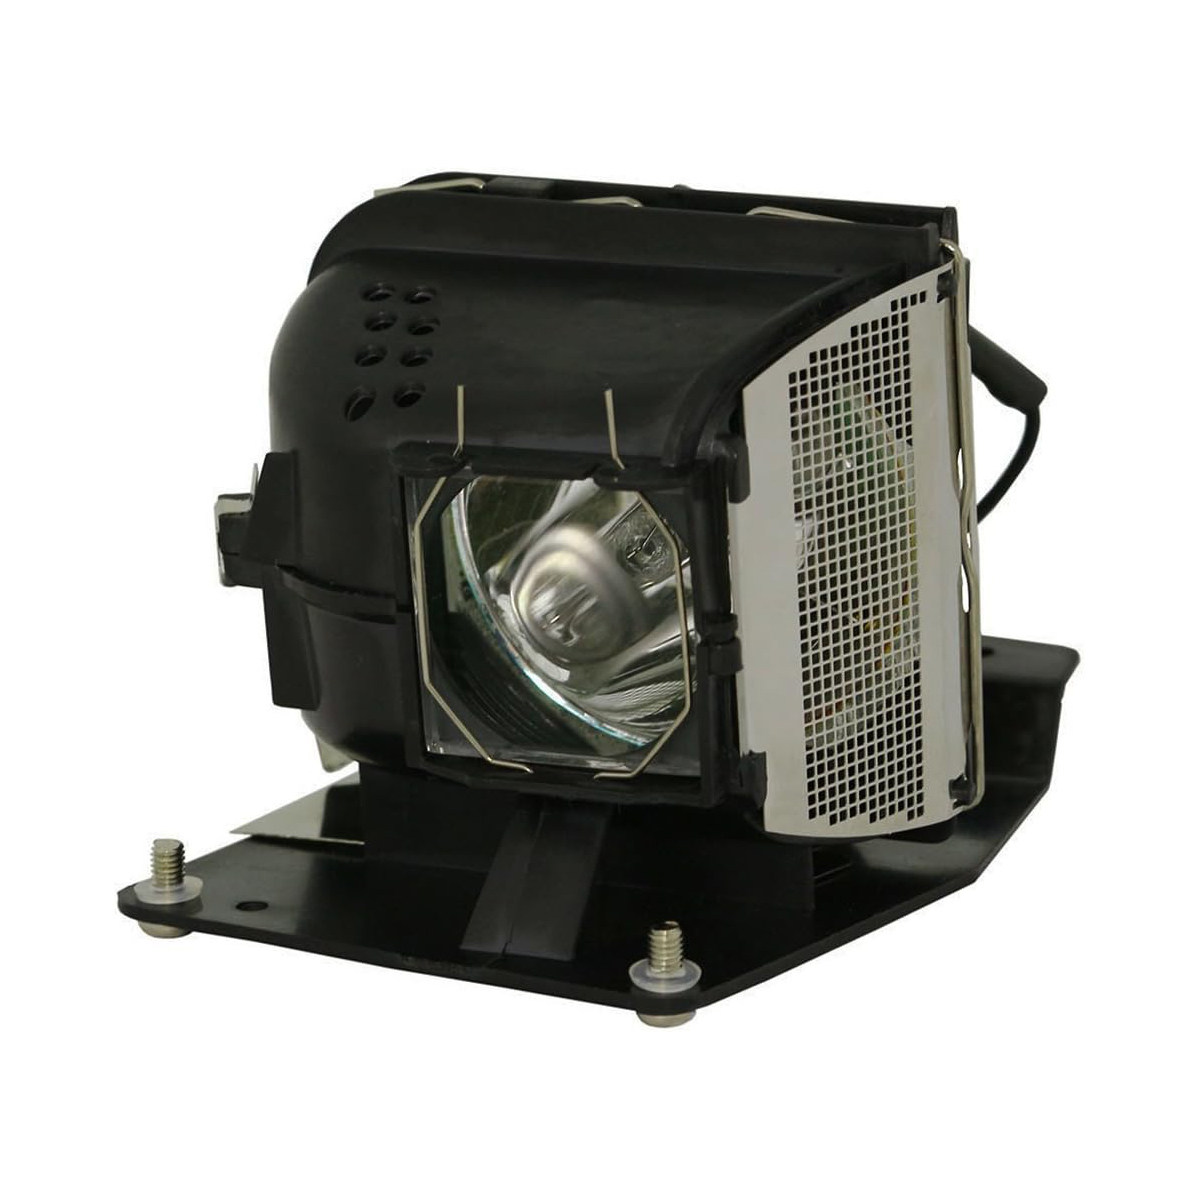 Replacement Projector lamp 456-241 For Dukane Projector